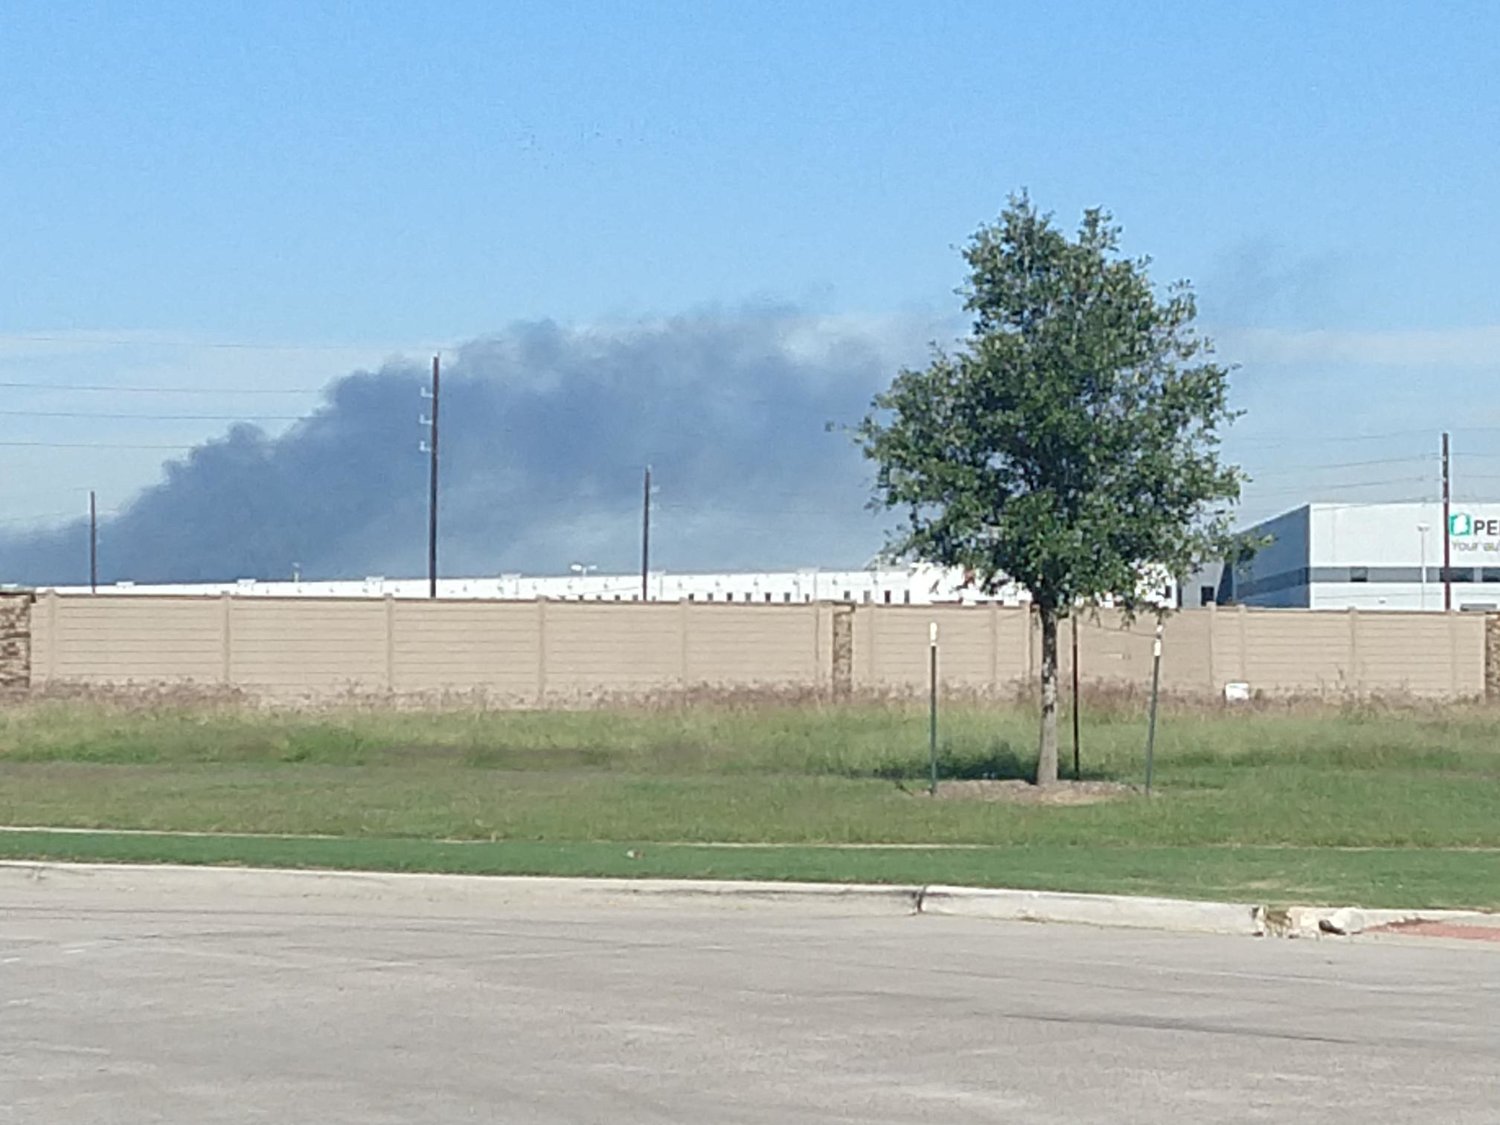 Smoke was easily visible from a long distance away after a dual-engine aircraft failed to take off at about 10 a.m. Tuesday morning.